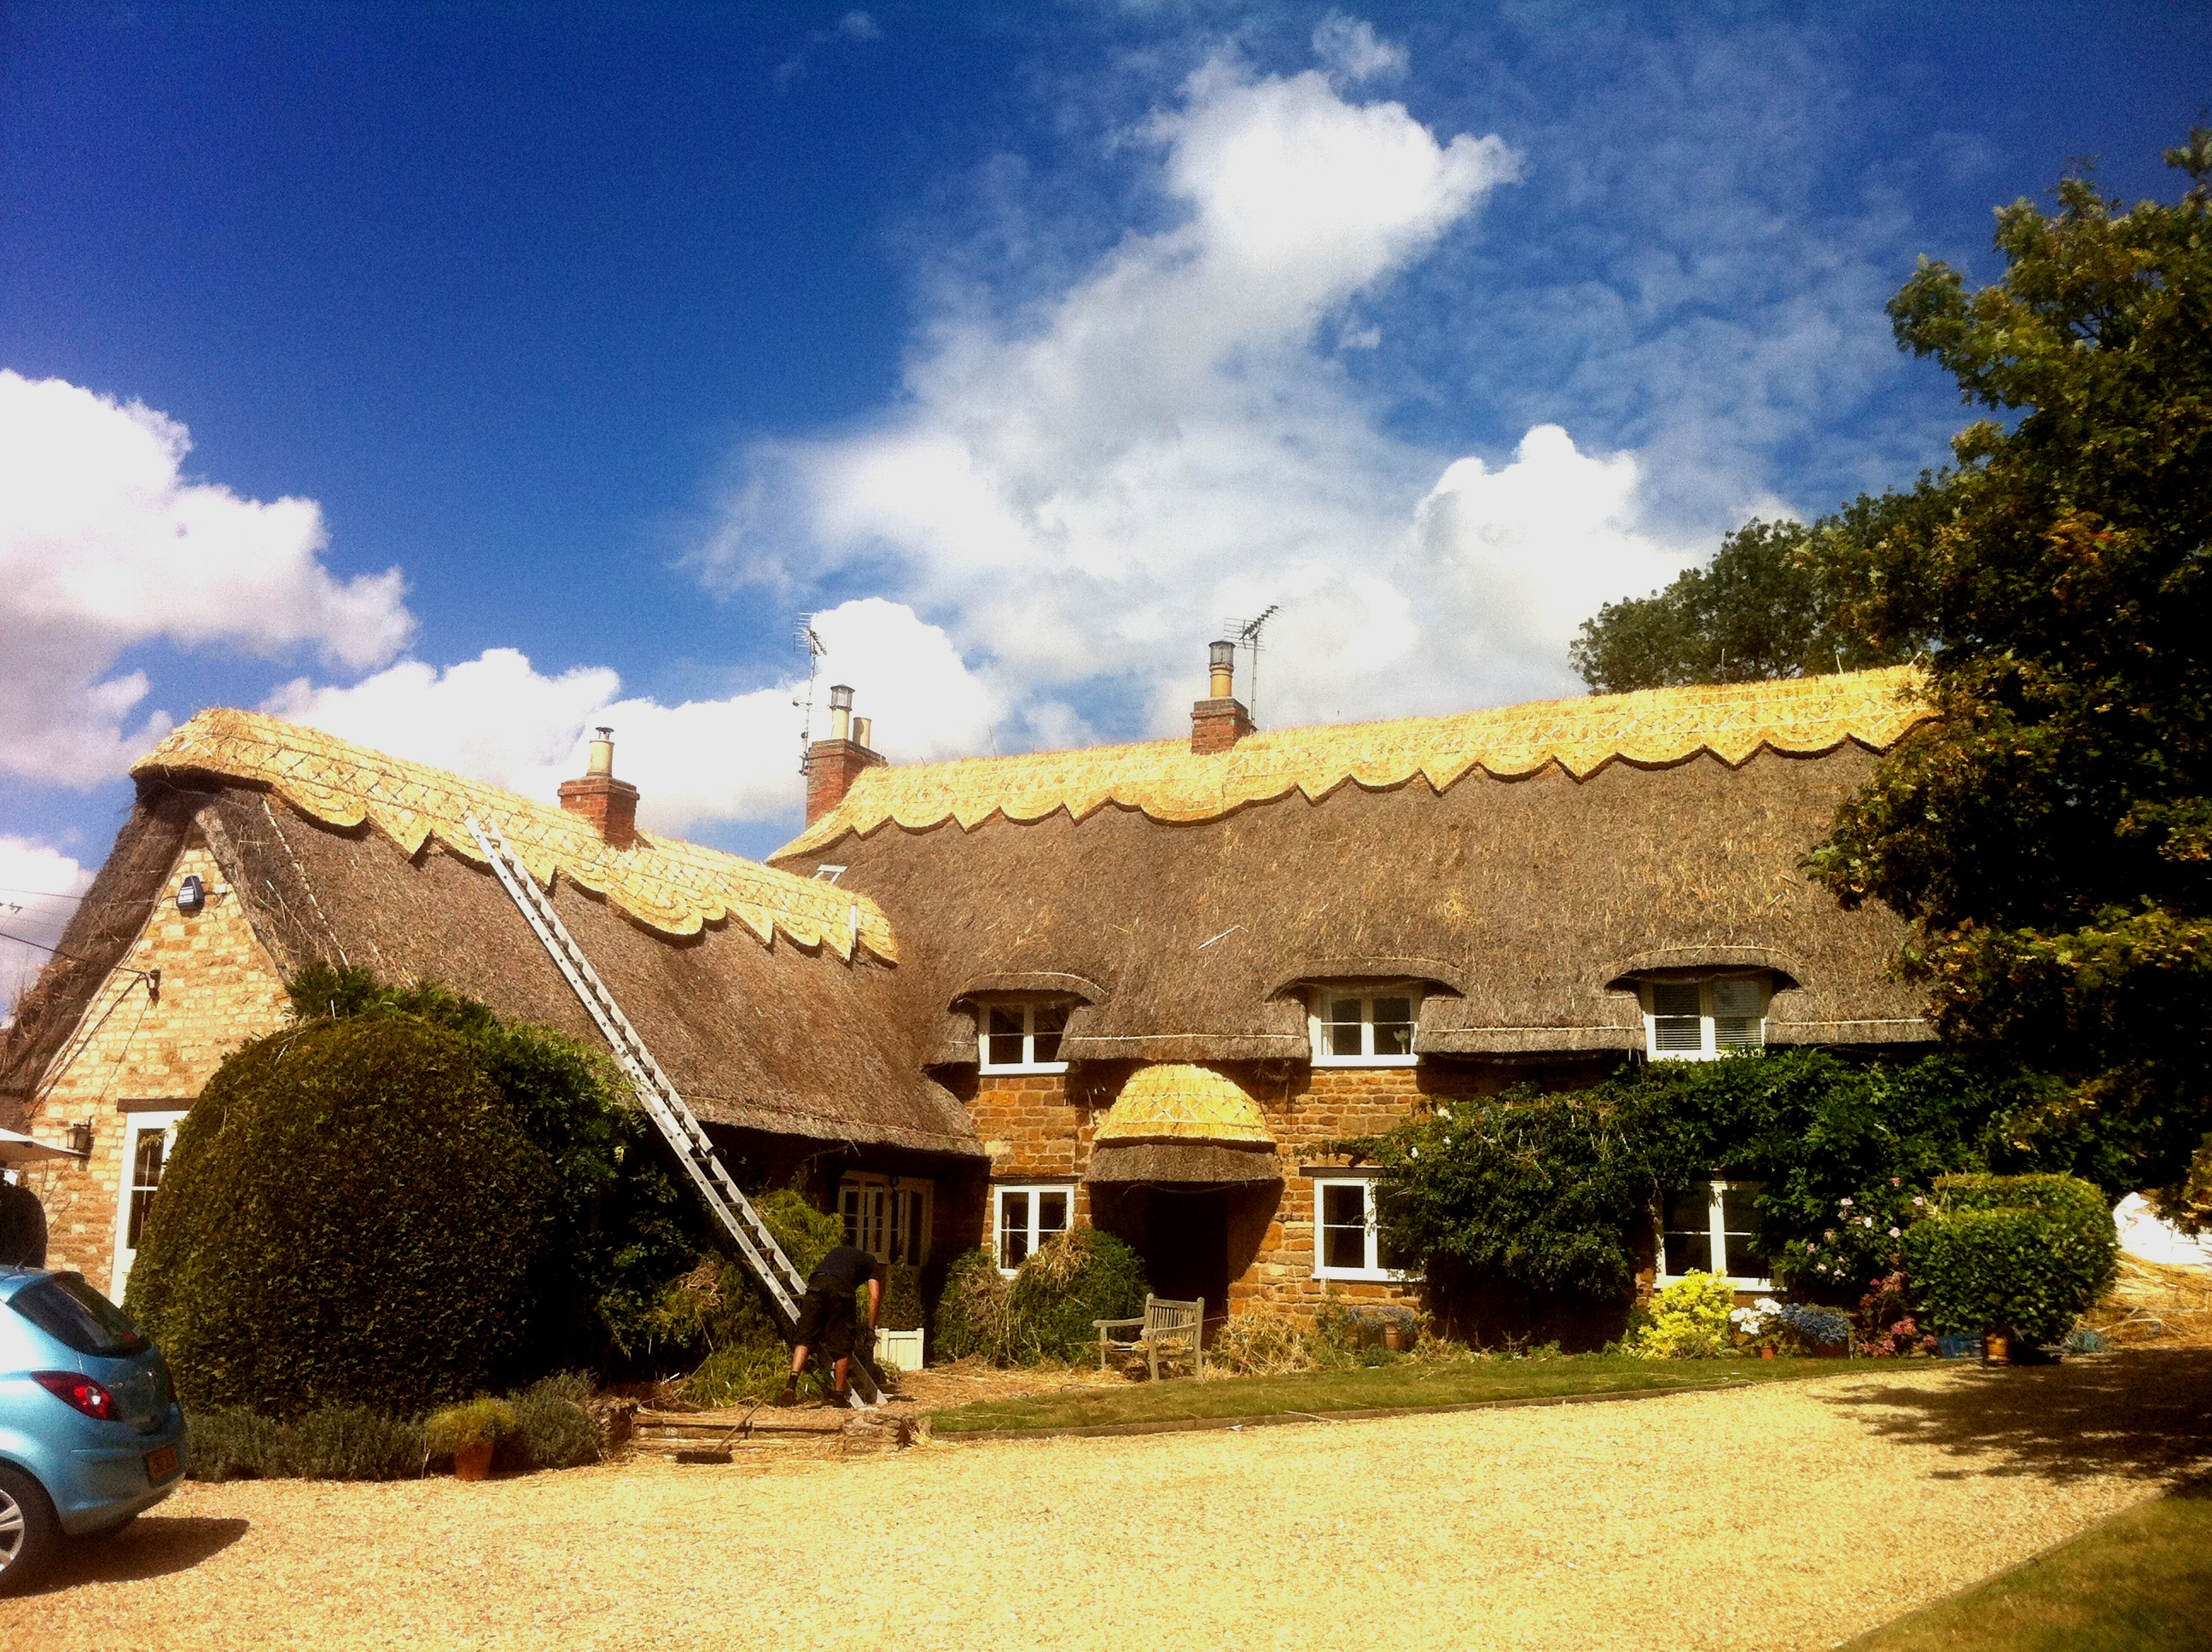 How Long Should A Thatched Roof Last?